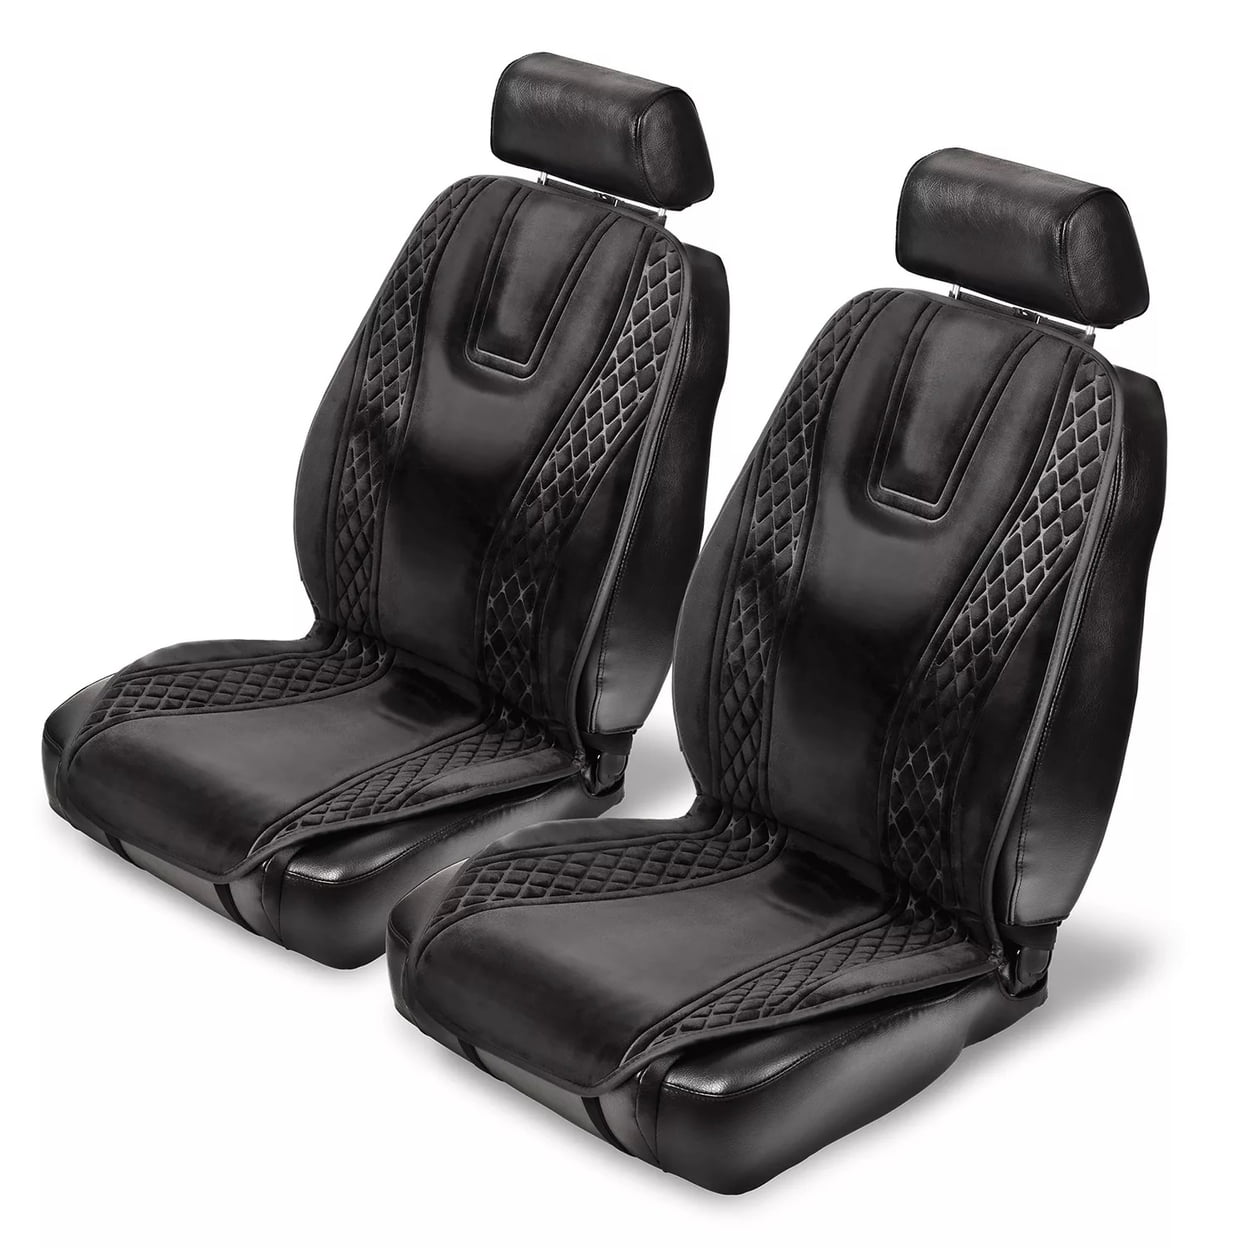 Is It Safe to Put Seat Covers on Heated Car Seats? Find Out!